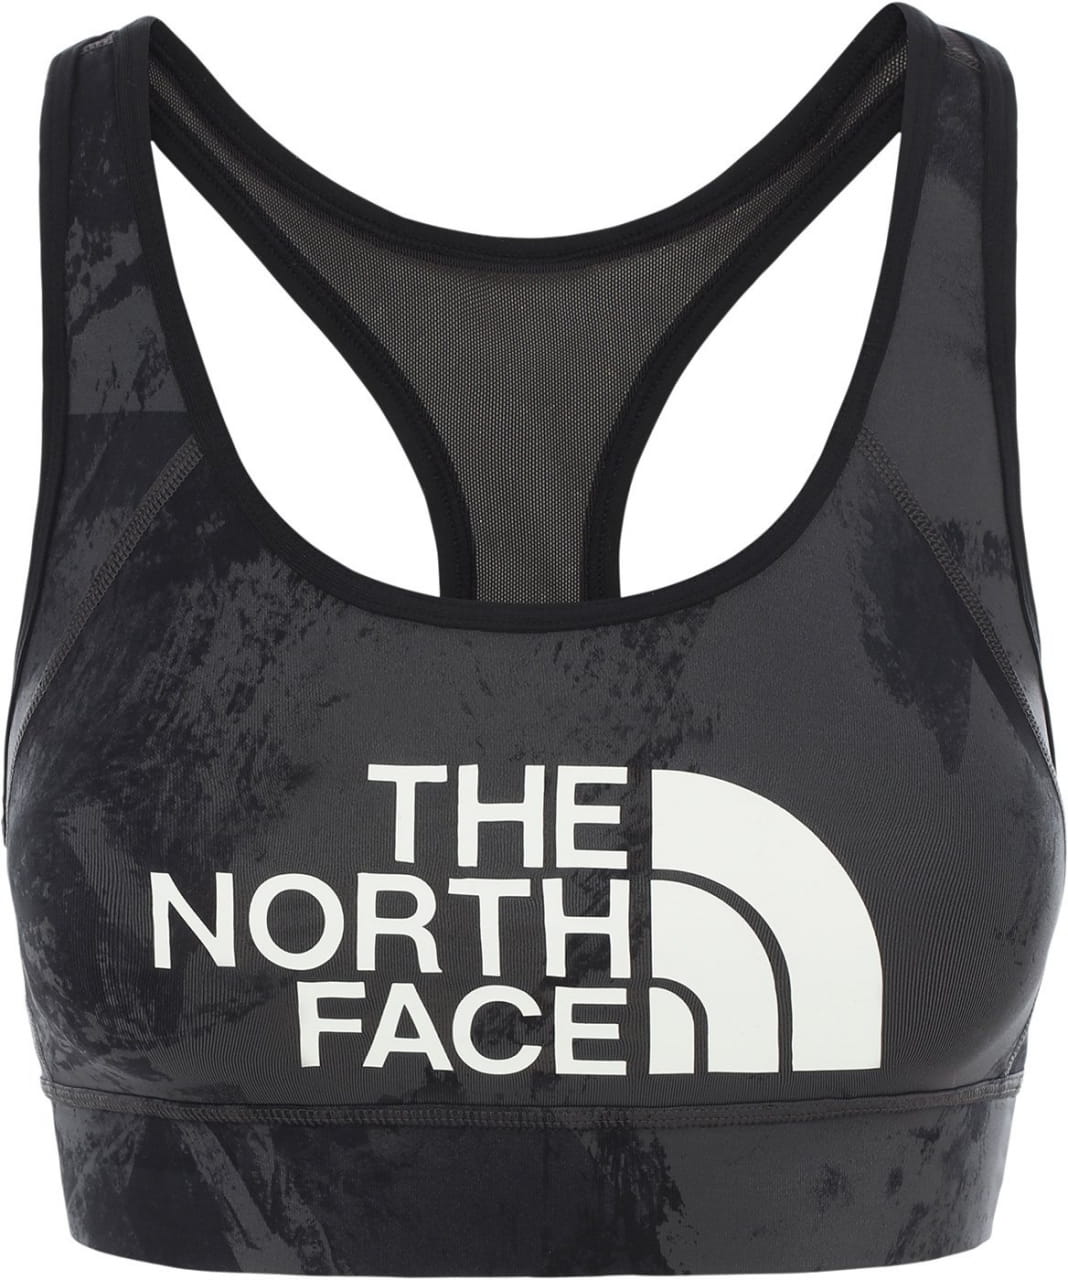 Bielizna The North Face Women's Bounce Be Gone Sports Bra